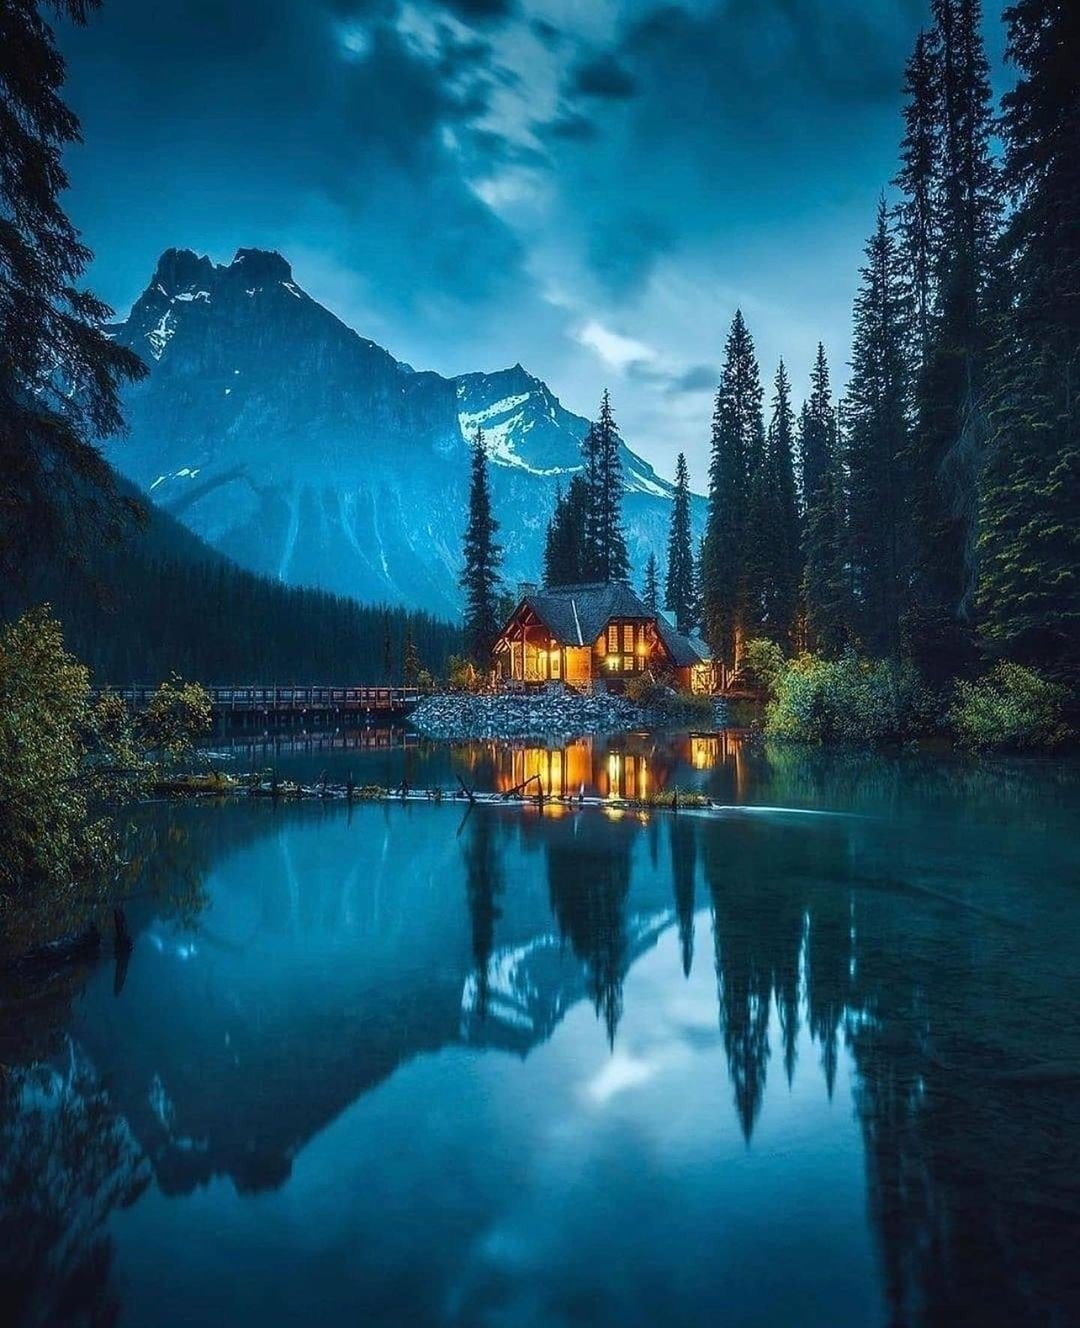 What An Absolutely Amazing Photo Of Emerald Lake In Canada 🇨🇦

Rate this shot from 1-10! 😍..Drop a ❤ in Comments if you loved this Shot.
📍Canada 📍
.
Follow 👉 @fervor.places 👈 for more amazing photos from around the world
.

Follow: @kakabooking 

📸 @merveceranphoto
.
.
.
.
.
.

  #naturephotography
#travelphotography #naturelovers
#travelgram #landscapephotography
#instratravel #landscapes
#photography #photooftheday
#travelblogger #beautifulplaces
#picoftheday #beautifulnature
#beautifulplace #naturelover #nature
#emeraldlake #travel #landscape

  #nature_addict #nurtureofnature

  #canadamountains #hikersofinstagram #scandinavianhome

  #canadanature #canada🇨🇦 #mountains

  #mountainlife #mountainview

  #mountainscape